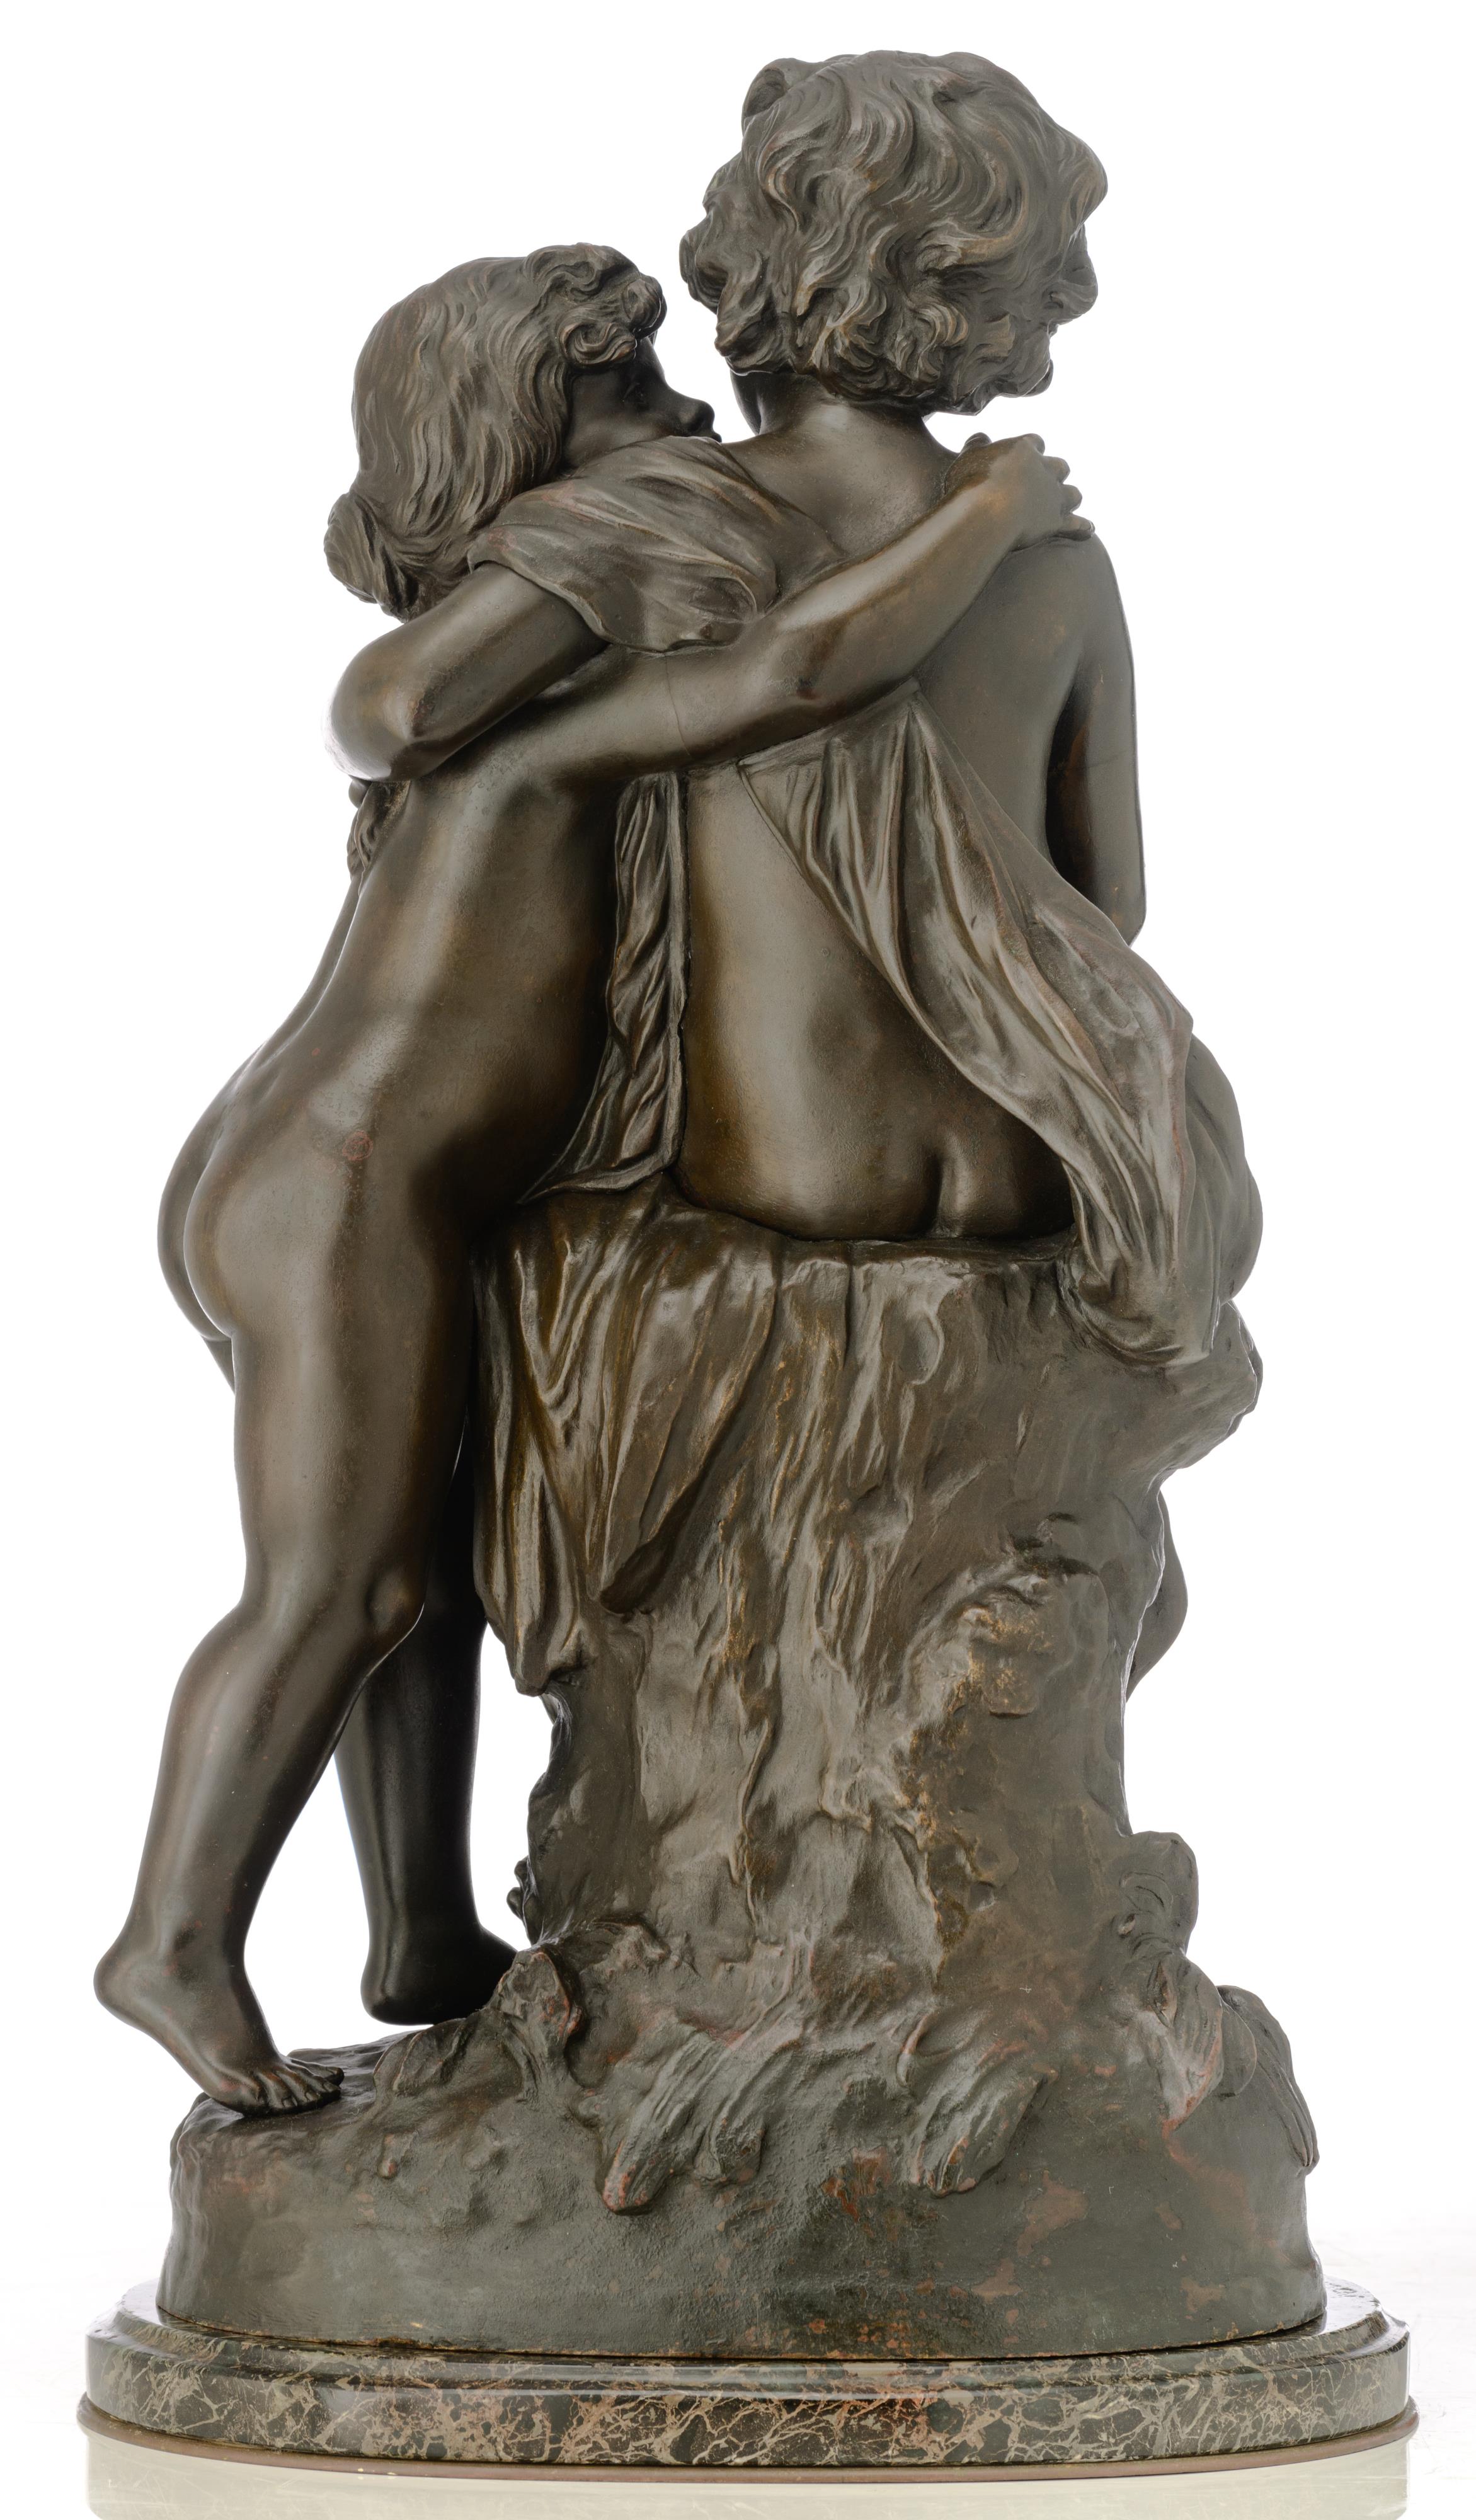 Moreau H., 'Un Secret', patinated bronze on a vert de mer marble base, H 67 - 70,5 (without and with - Image 3 of 9